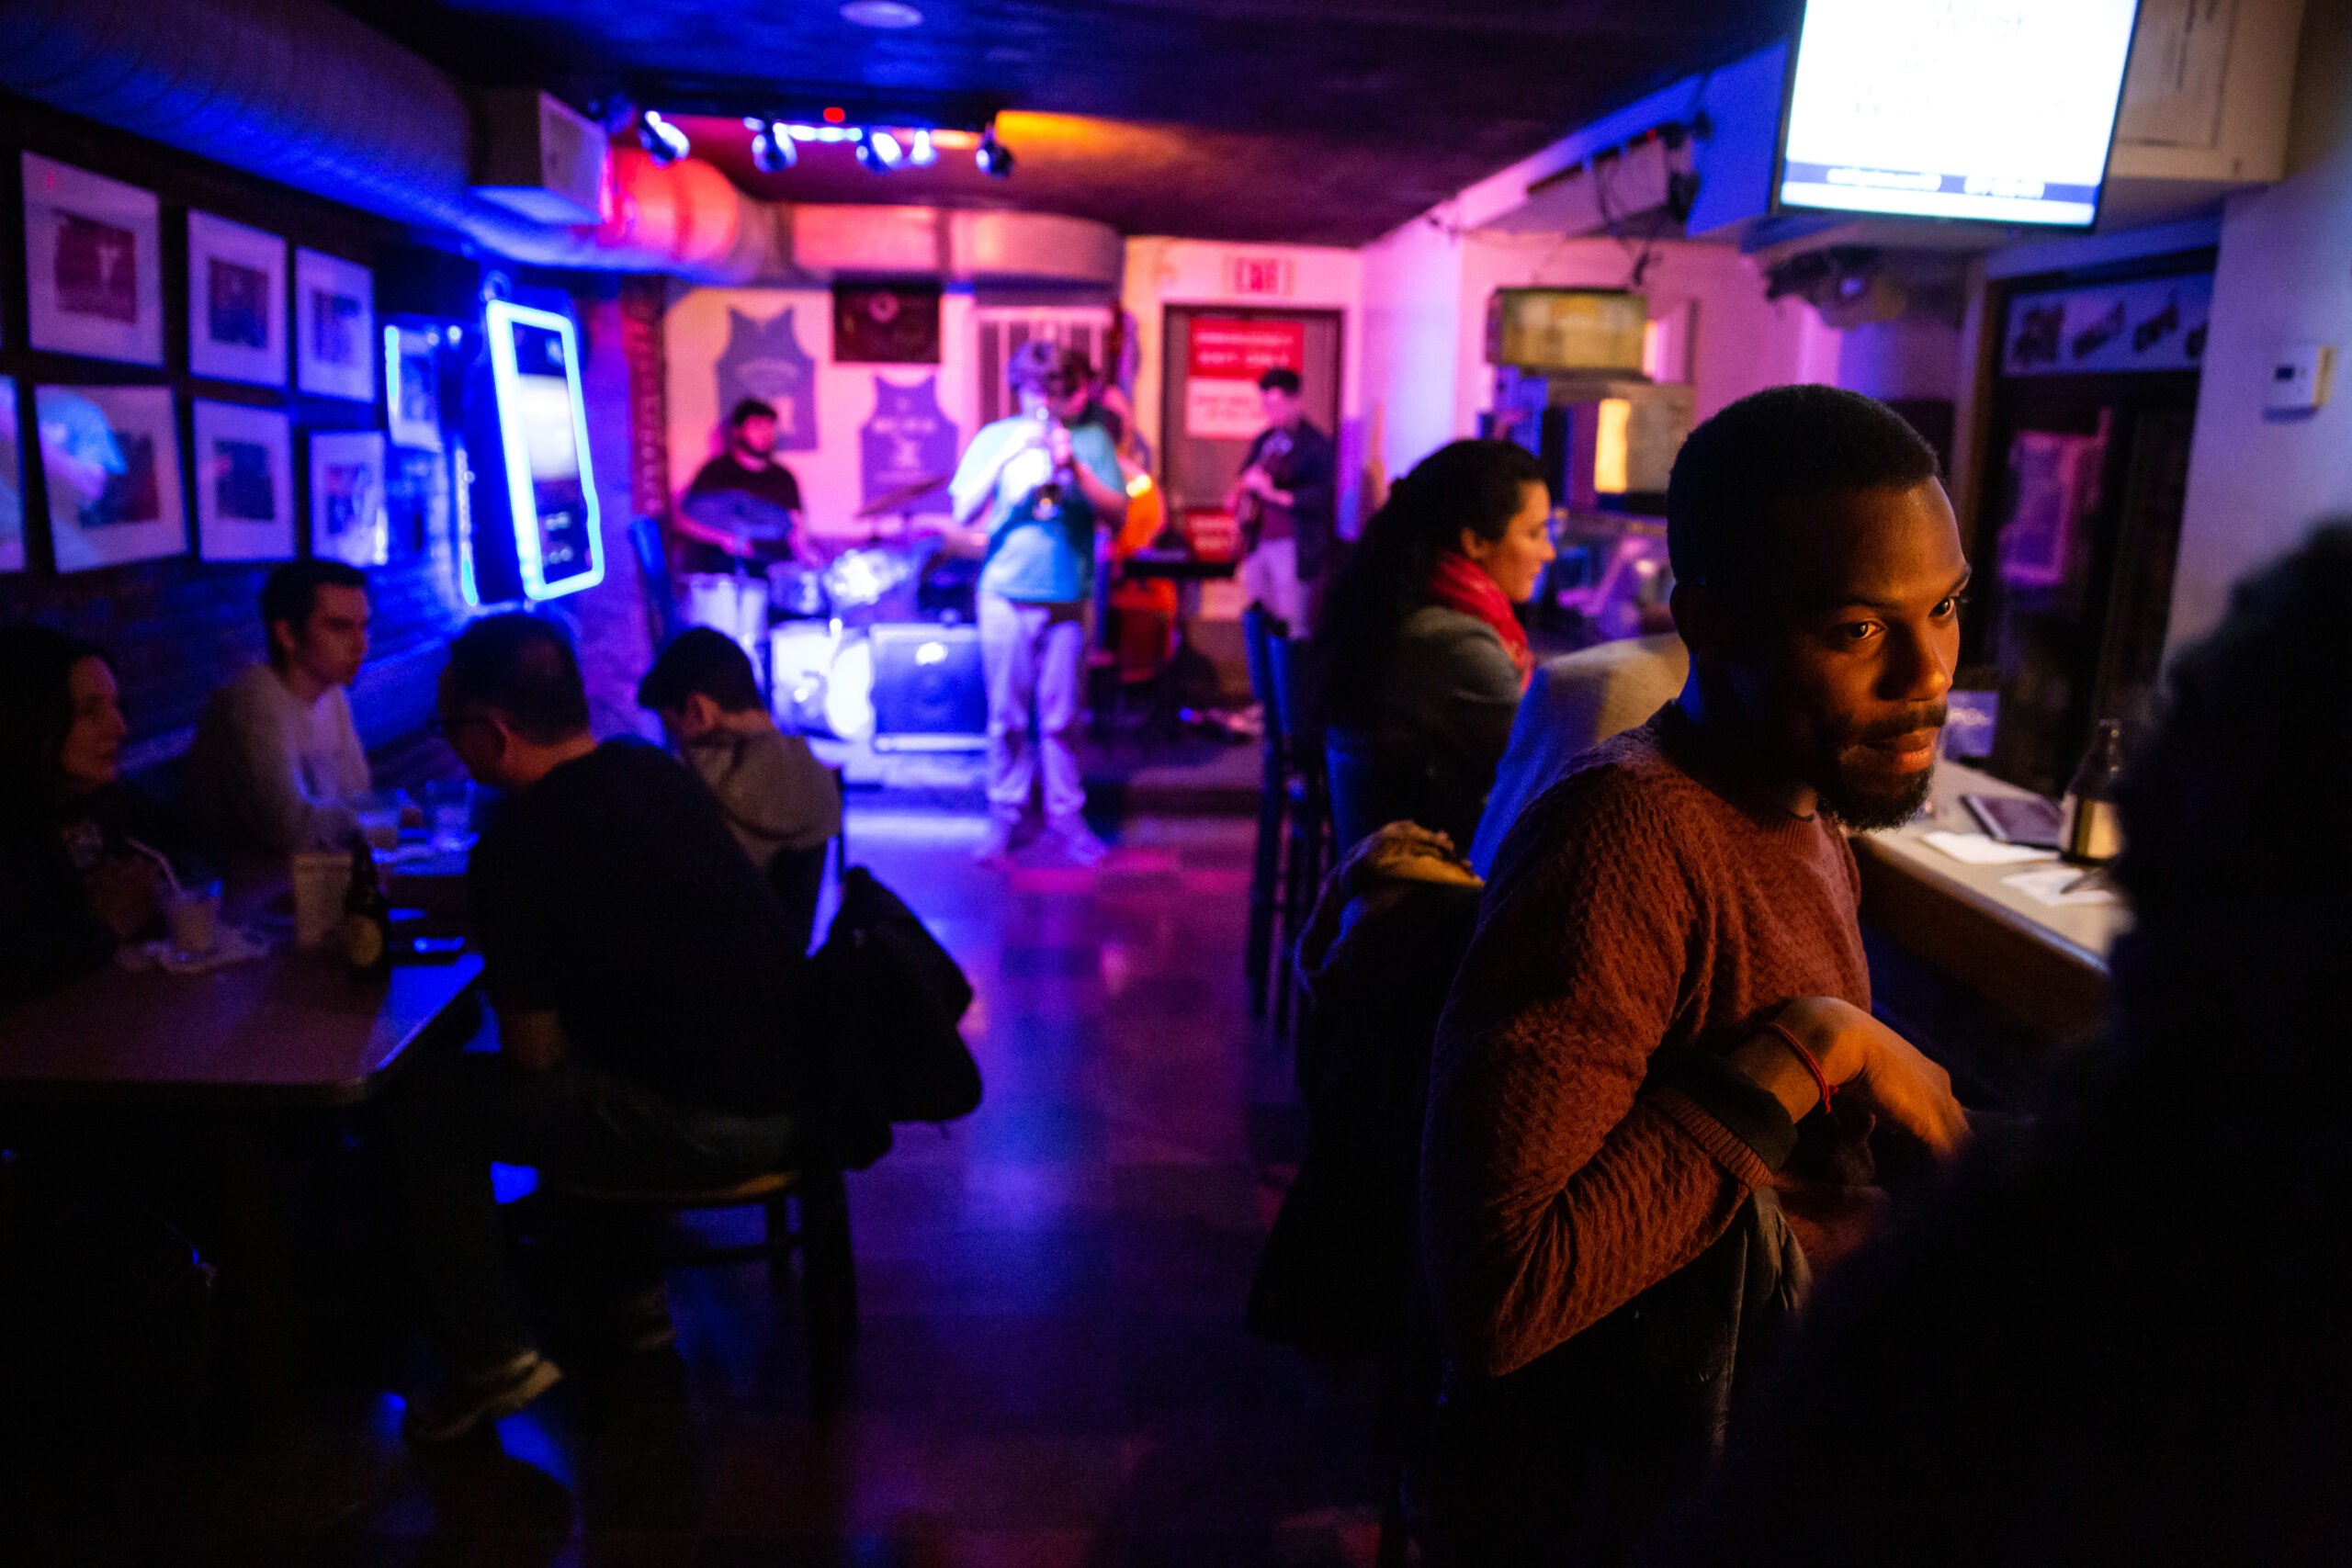 A historic South End jazz club has raised more than $35,000 for an